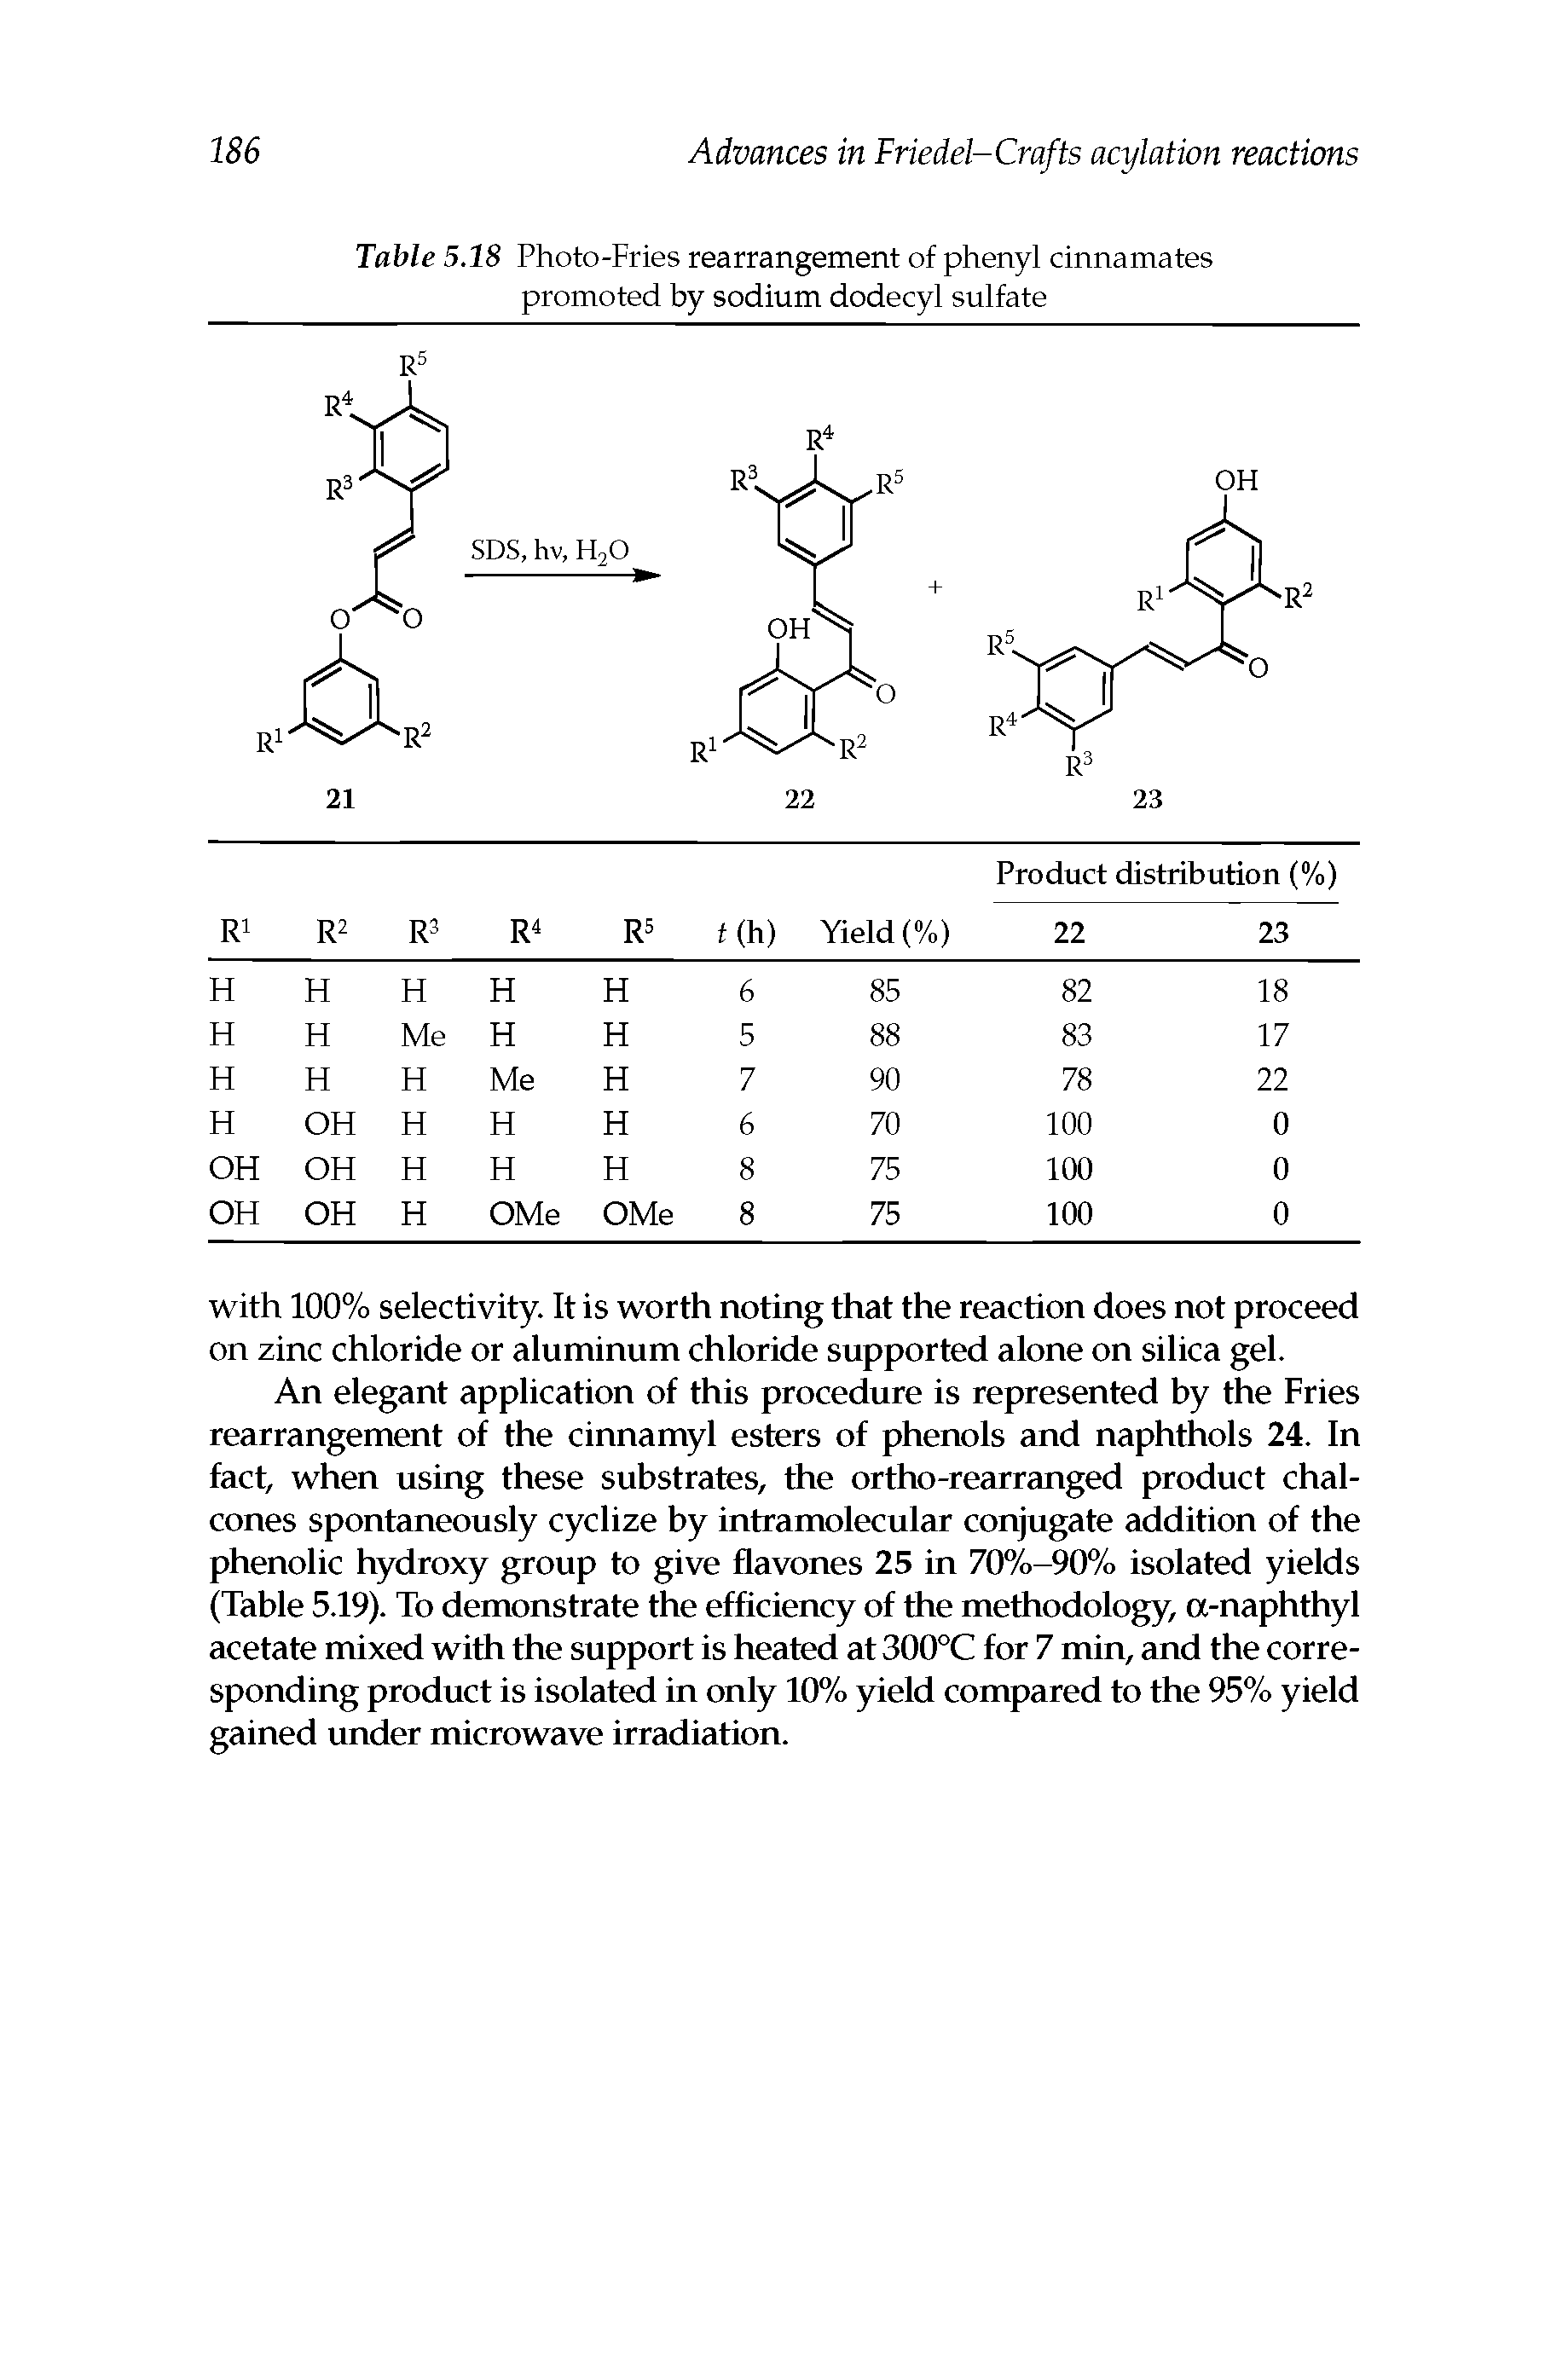 Table 5.18 Photo-Fries rearrangement of phenyl cinnamates promoted by sodium dodecyl sulfate...